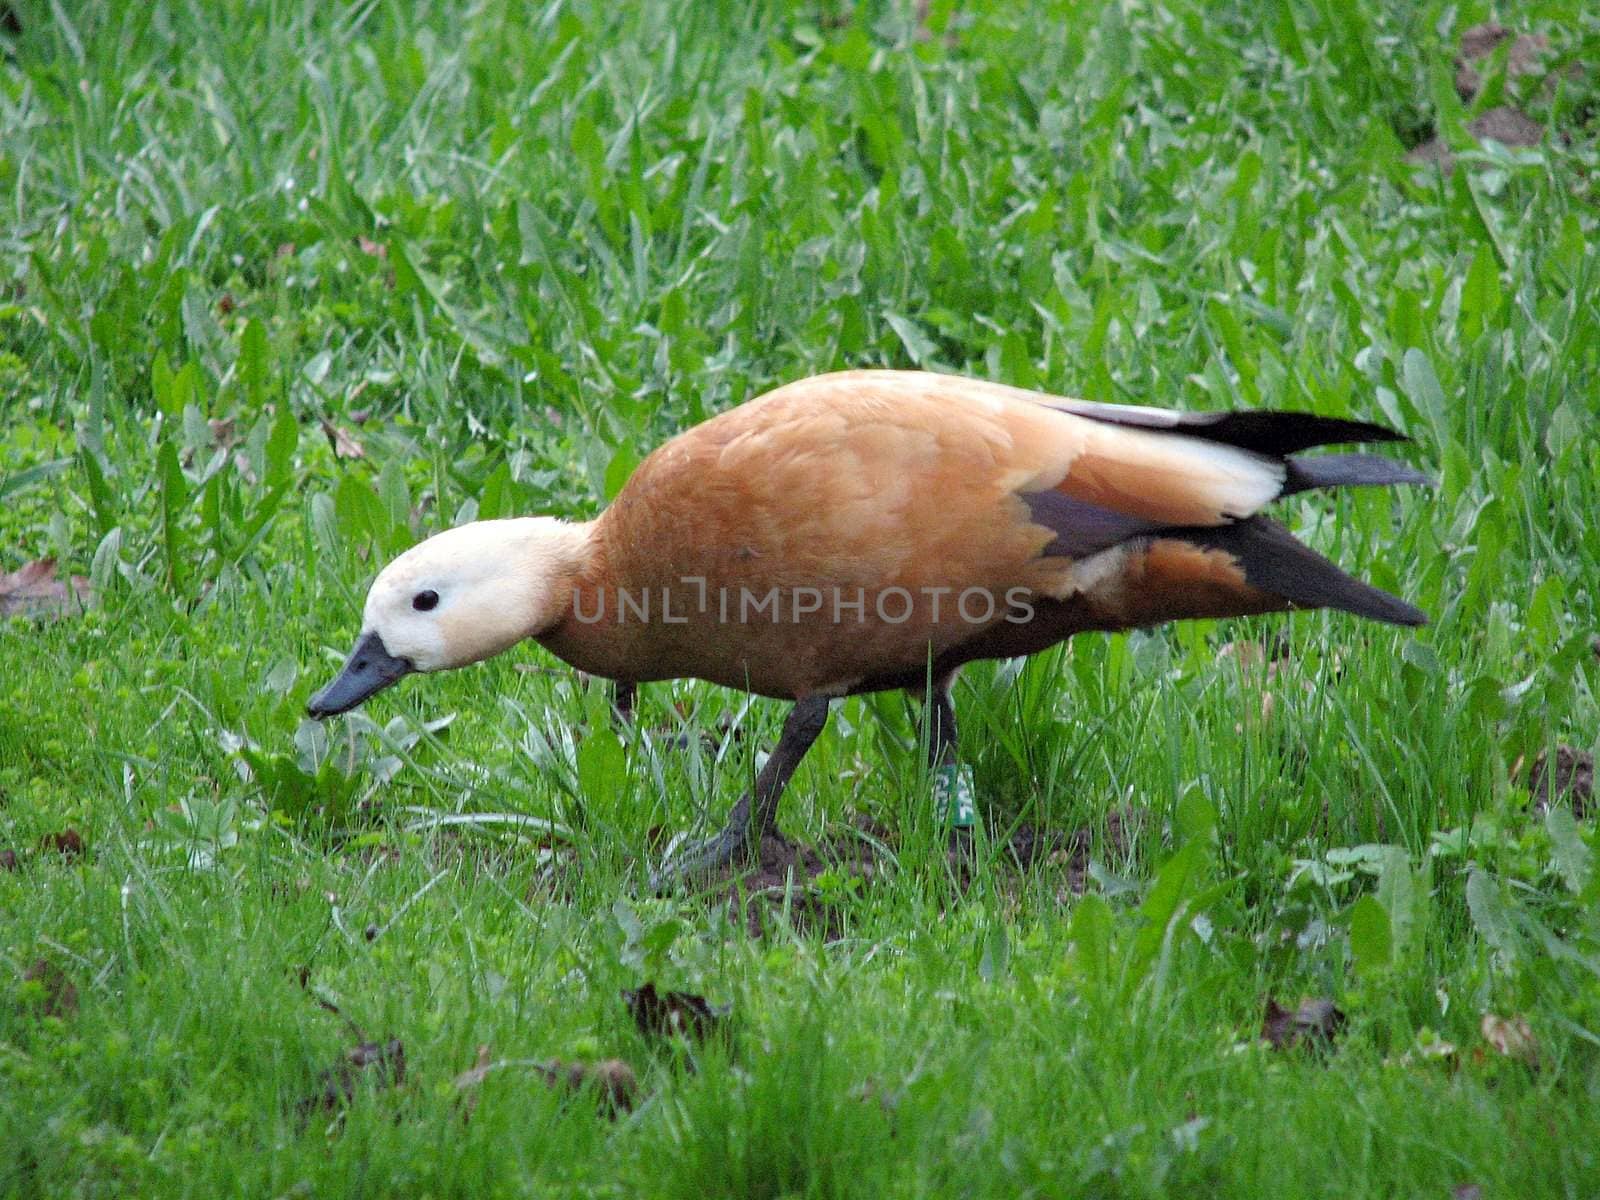 The sheldduck standing in the grass near a lake